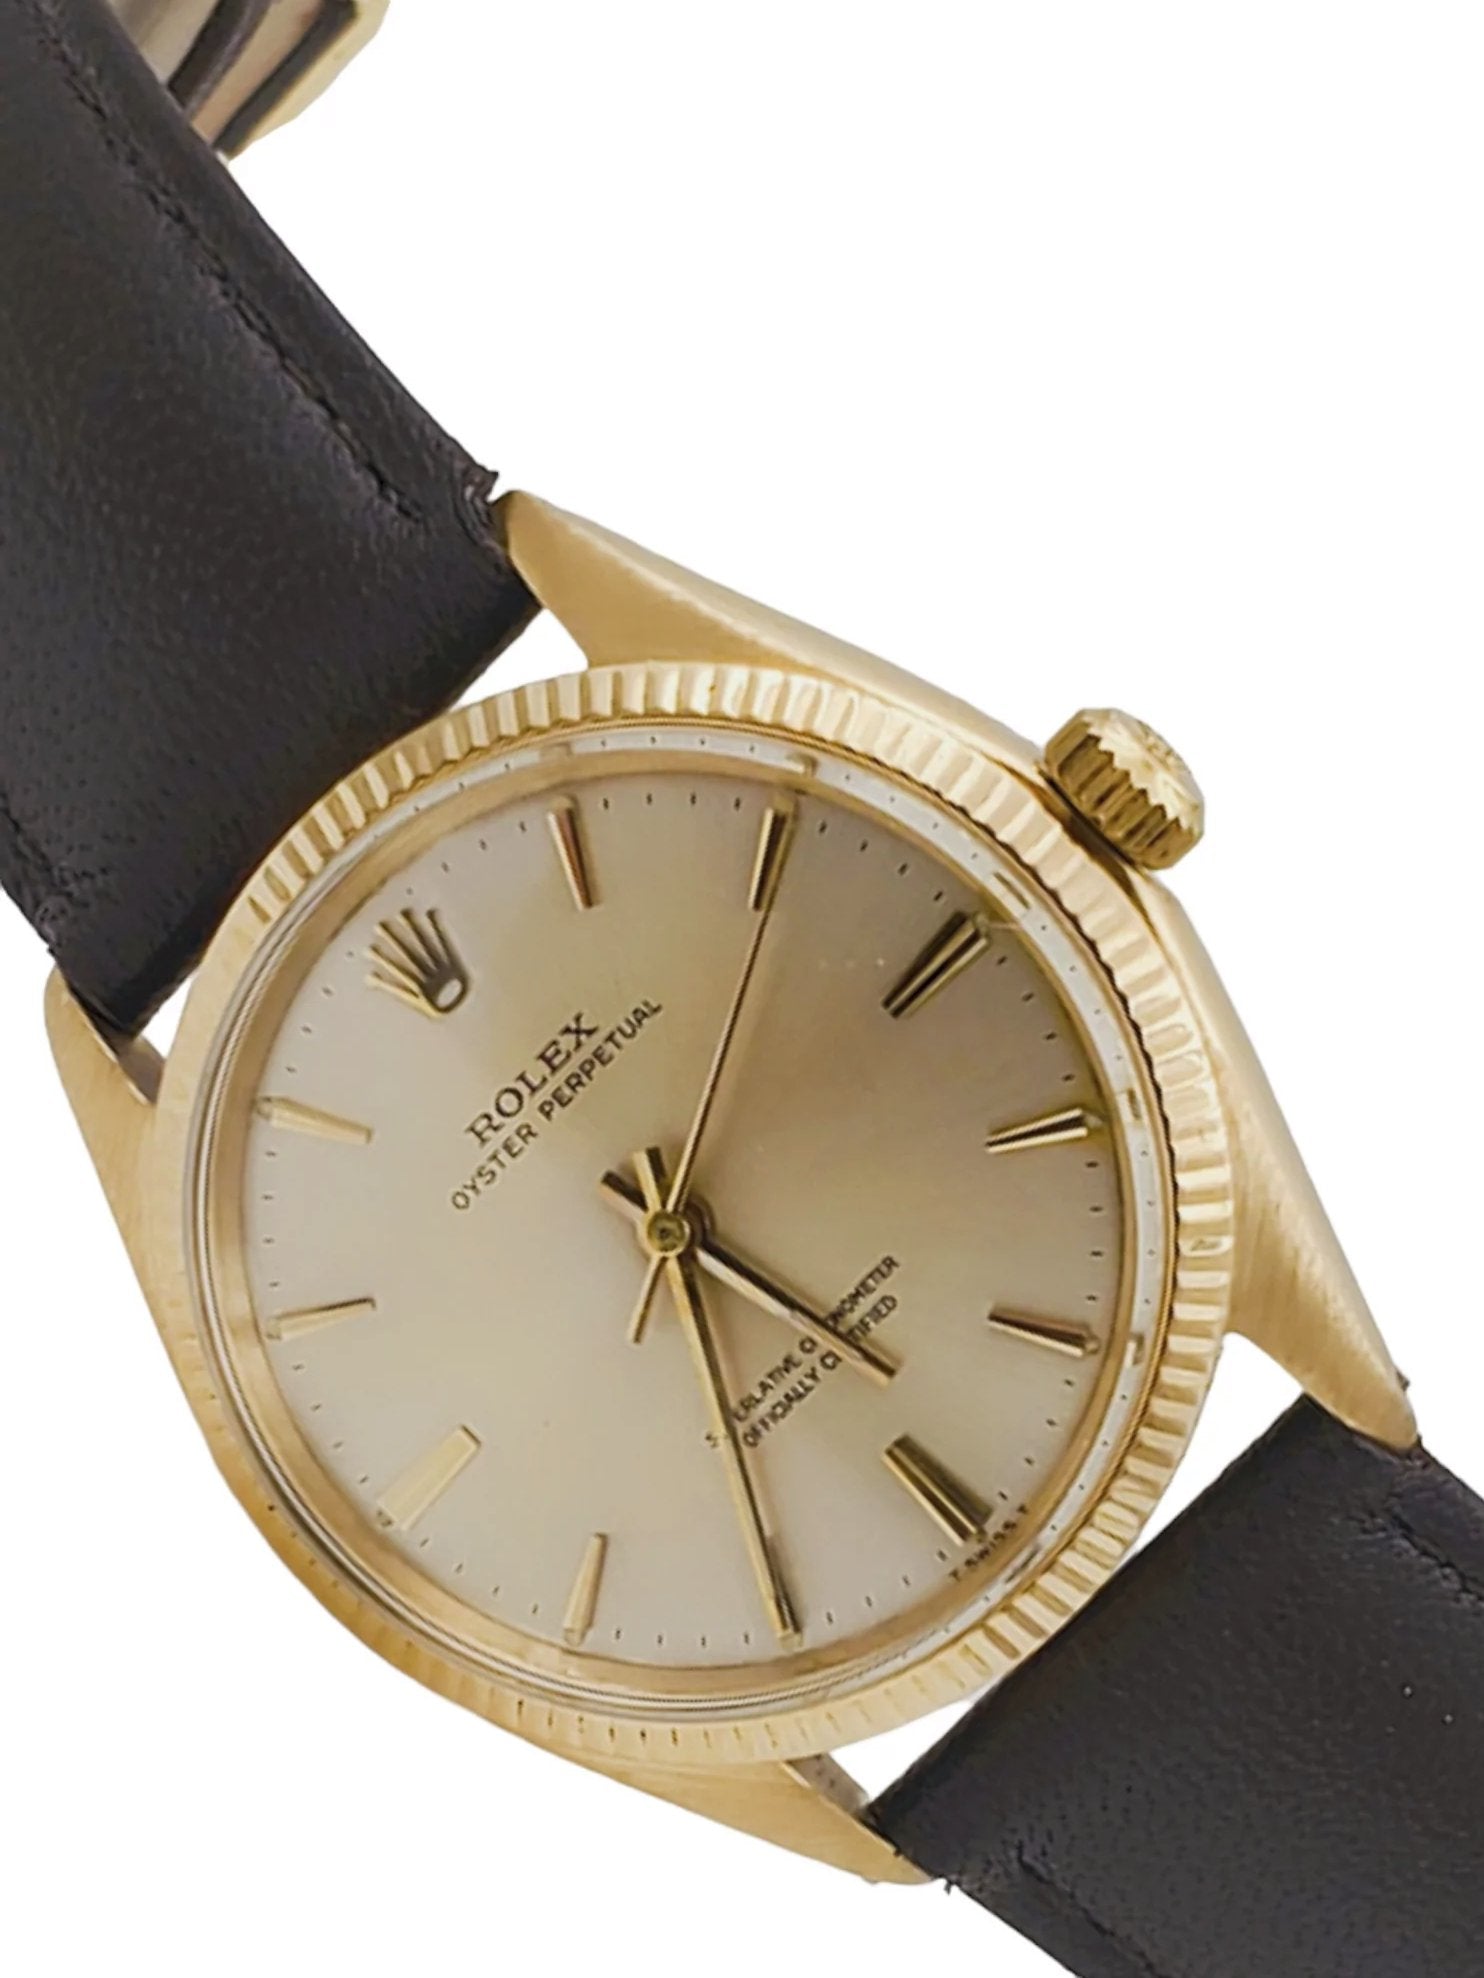 Men's Rolex 34mm Vintage 1962 Oyster Perpetual 14K Yellow Gold Watch with Gold Dial and Brown Leather Strap. (Pre-Owned)